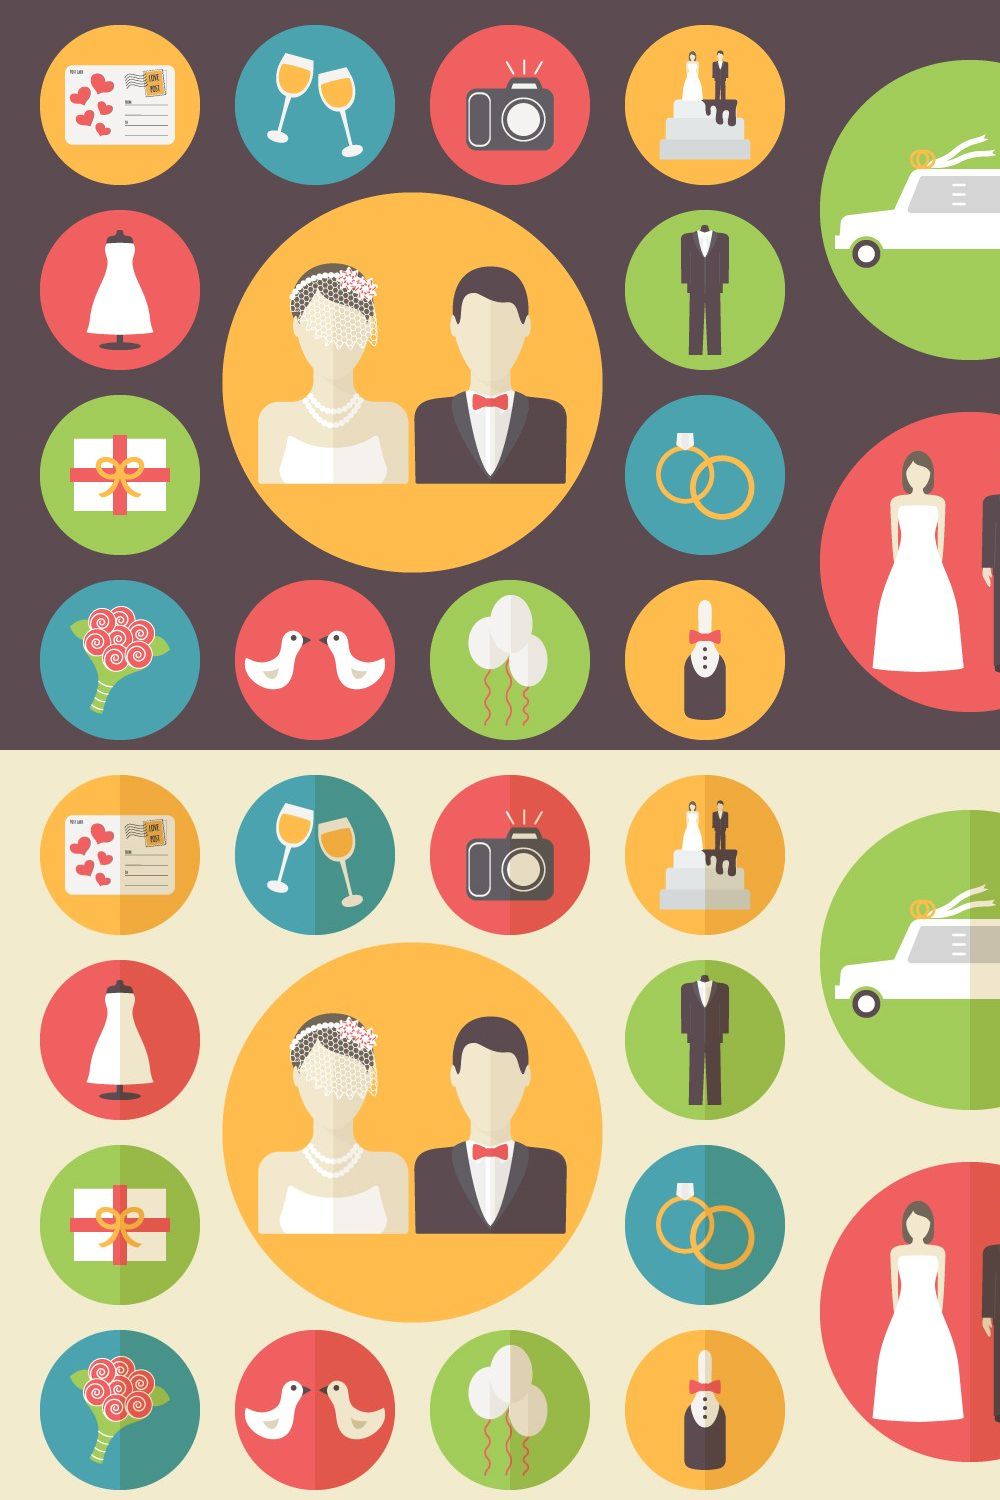 Wedding icons set pinterest preview image.